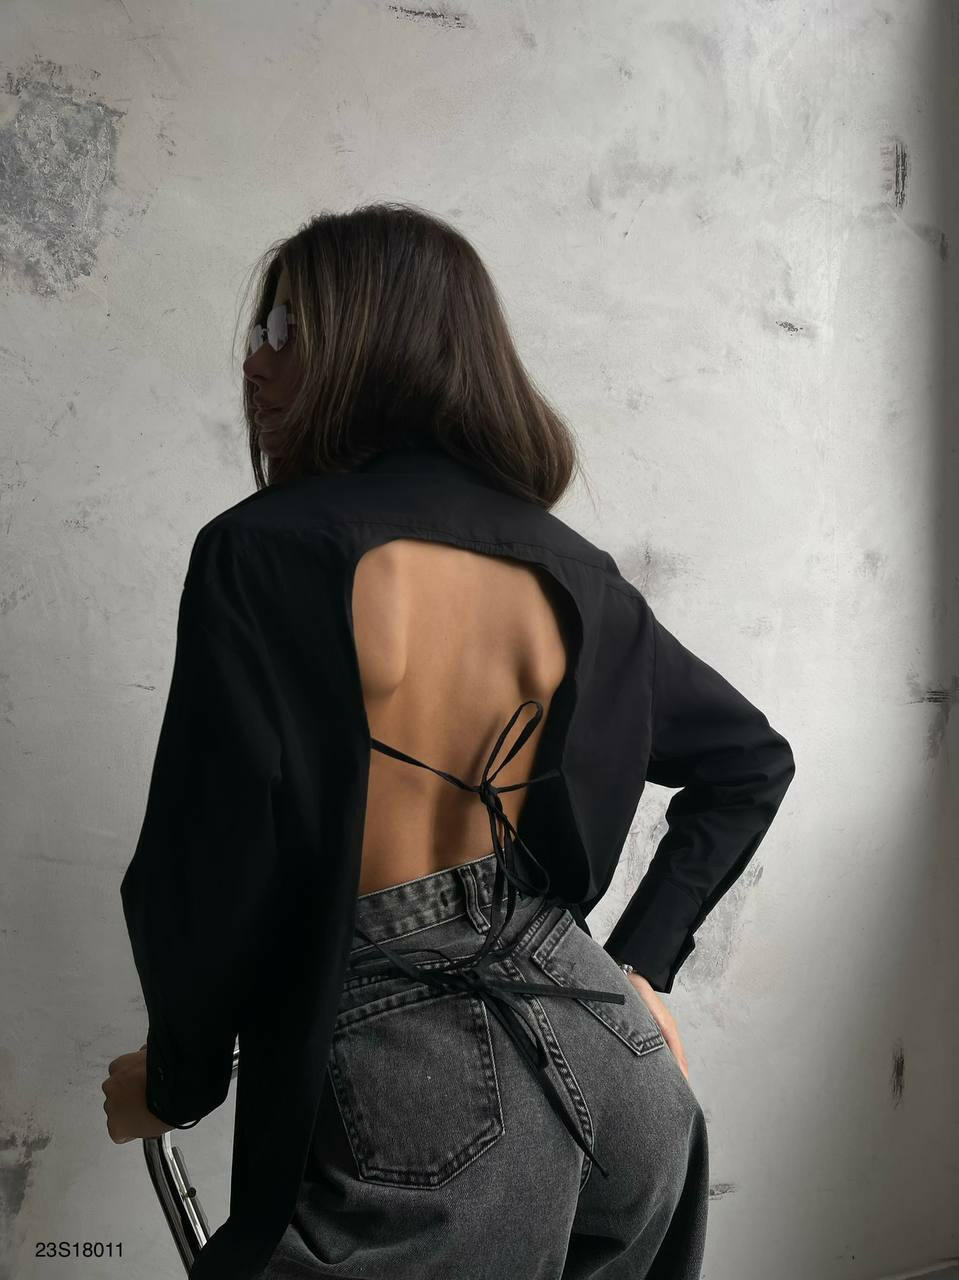 Backless Long Sleeveless Lace-up Shirt in Black - Noxlook